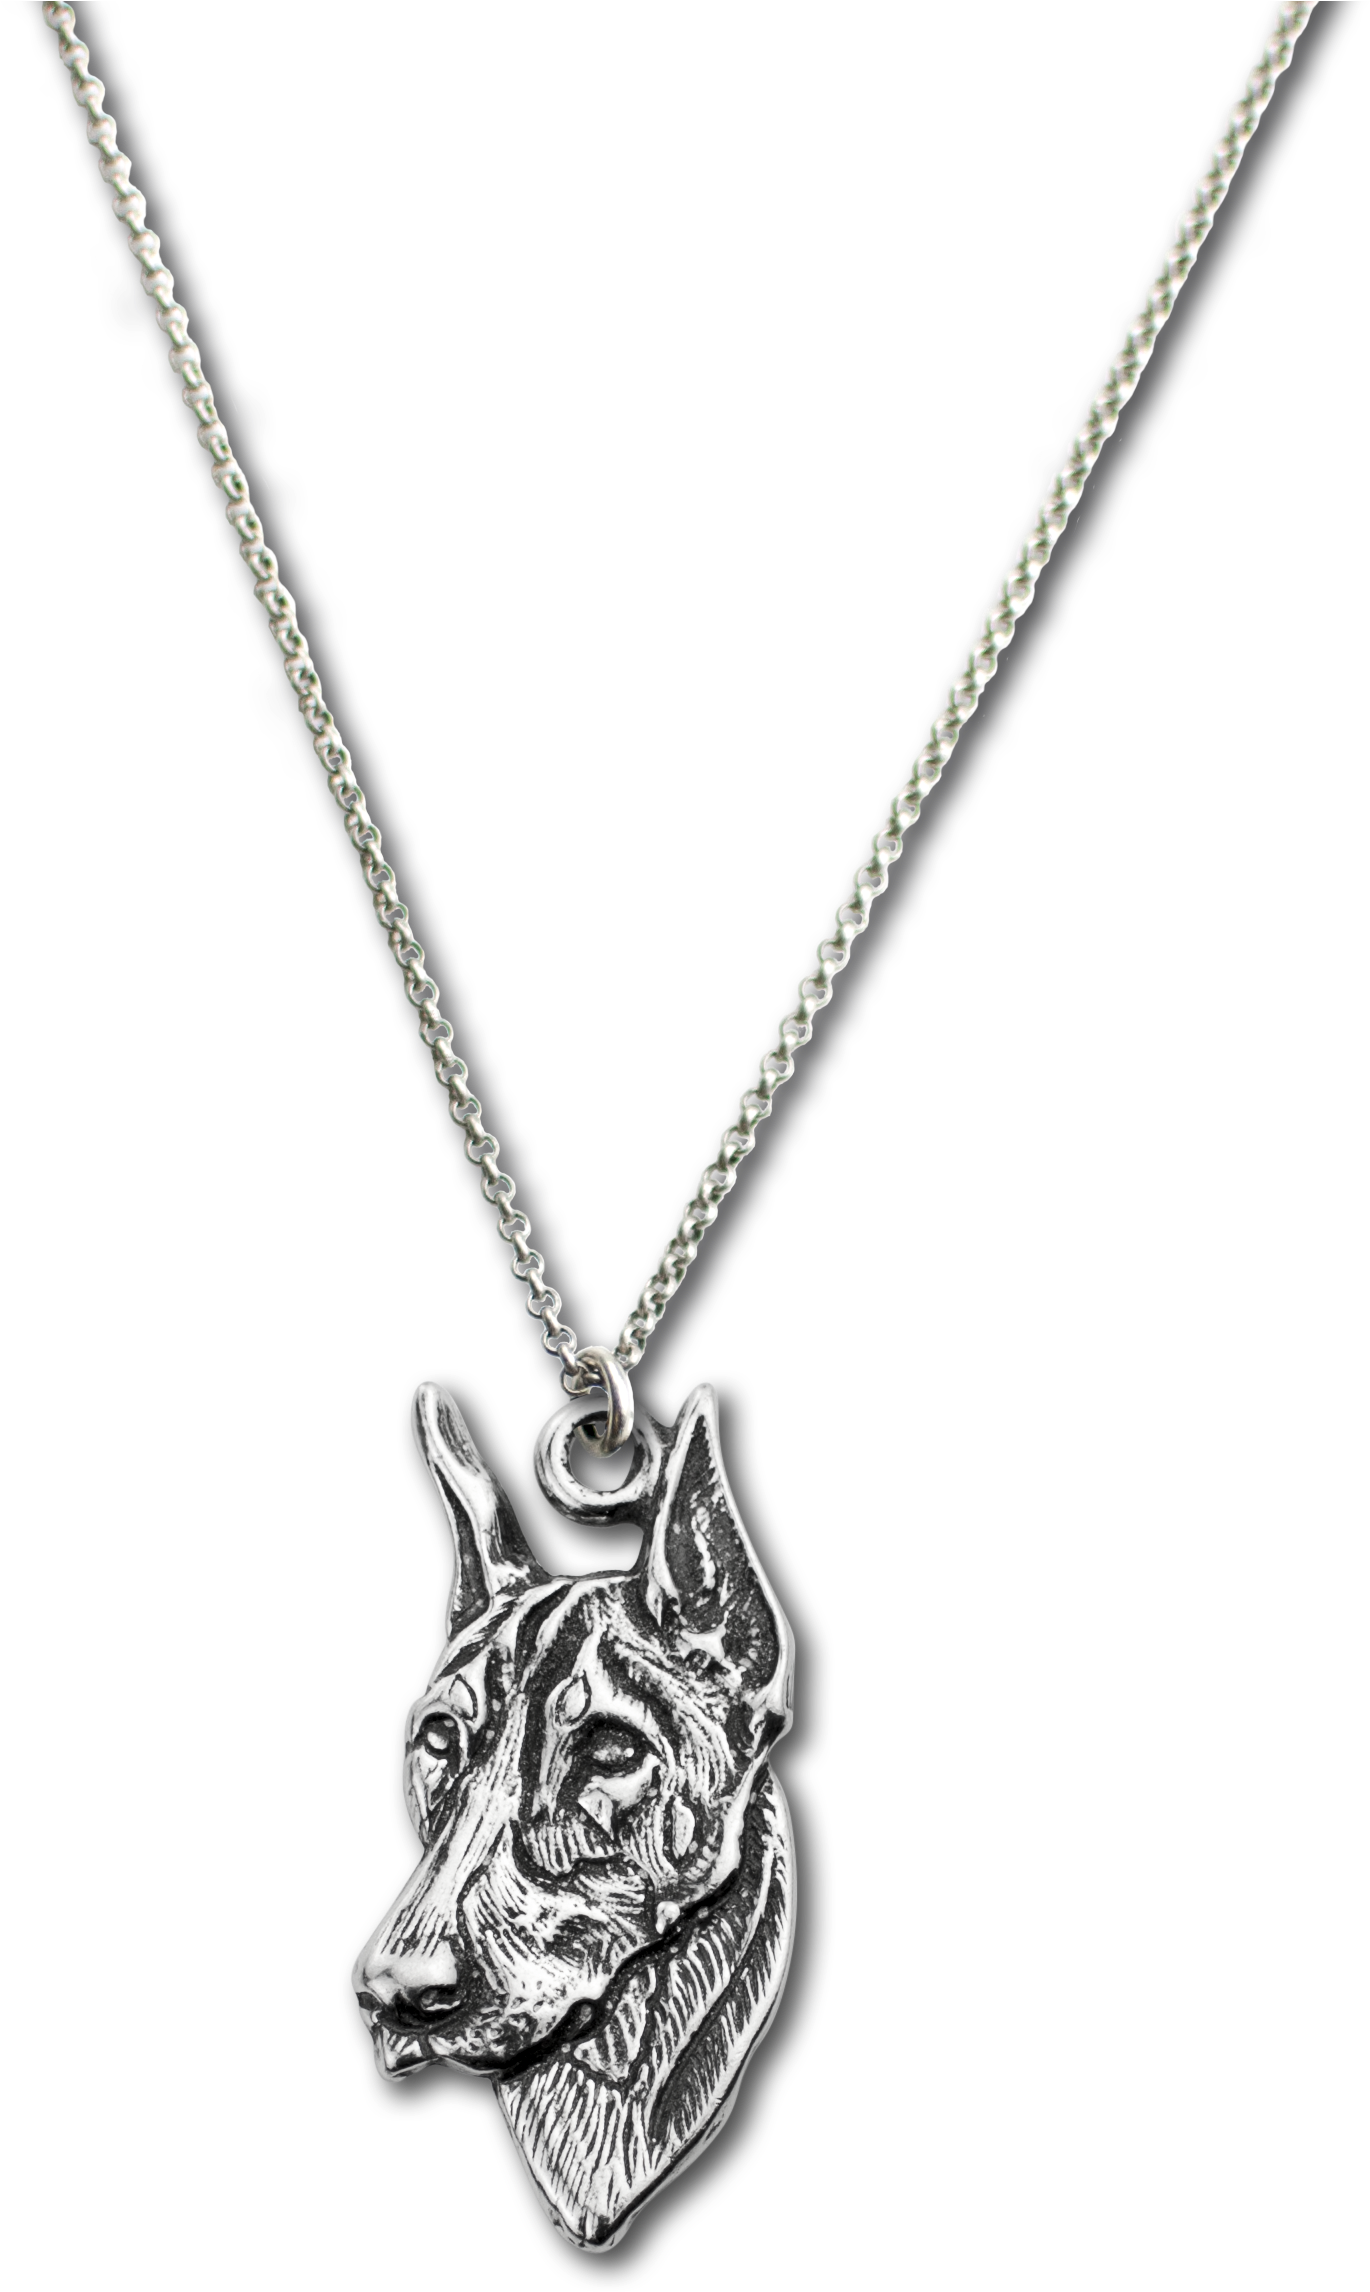 A Silver Necklace With A Dog Head Pendant